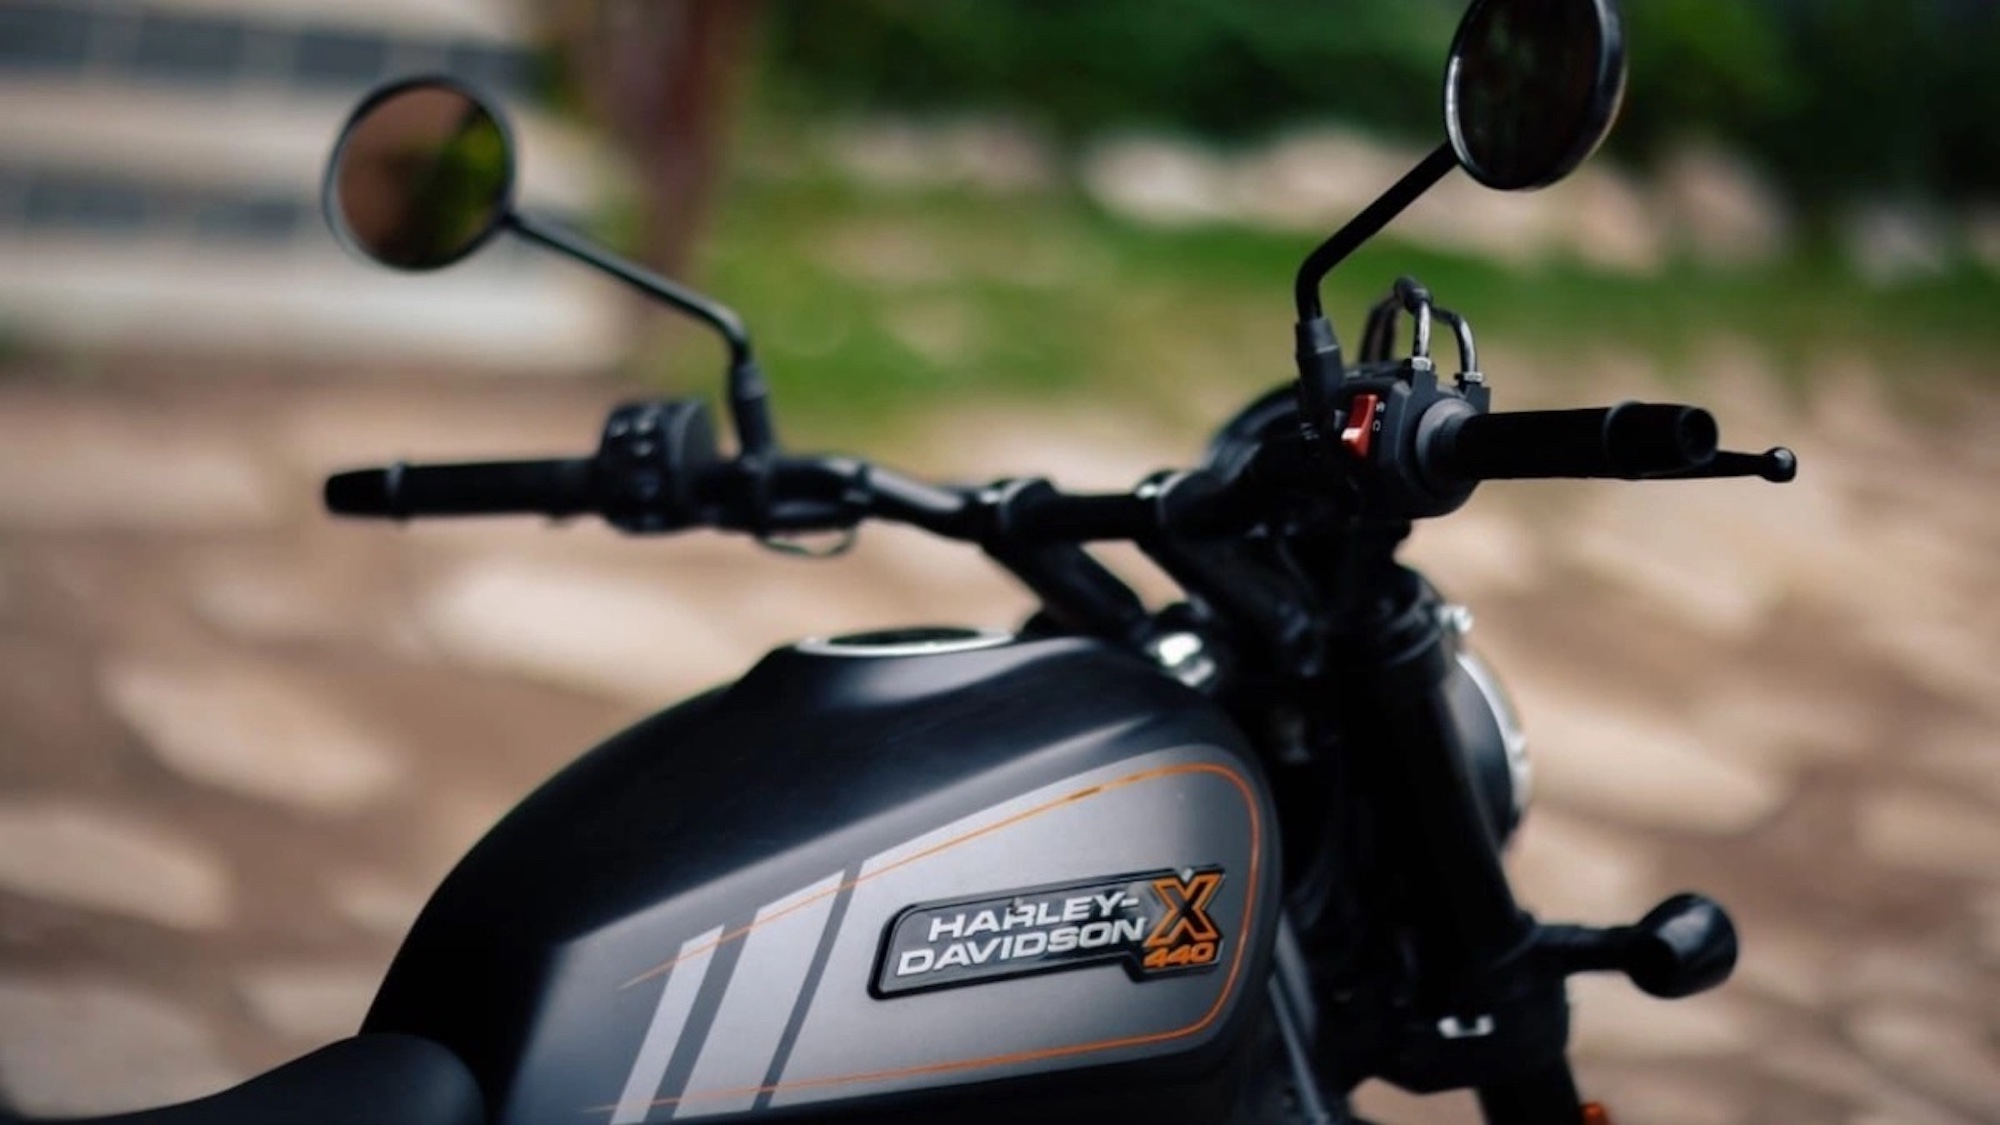 The newest view of Harley-Davidson's X440, co-developed and built by Hero Motocorp. Media sourced from The Financial Express.